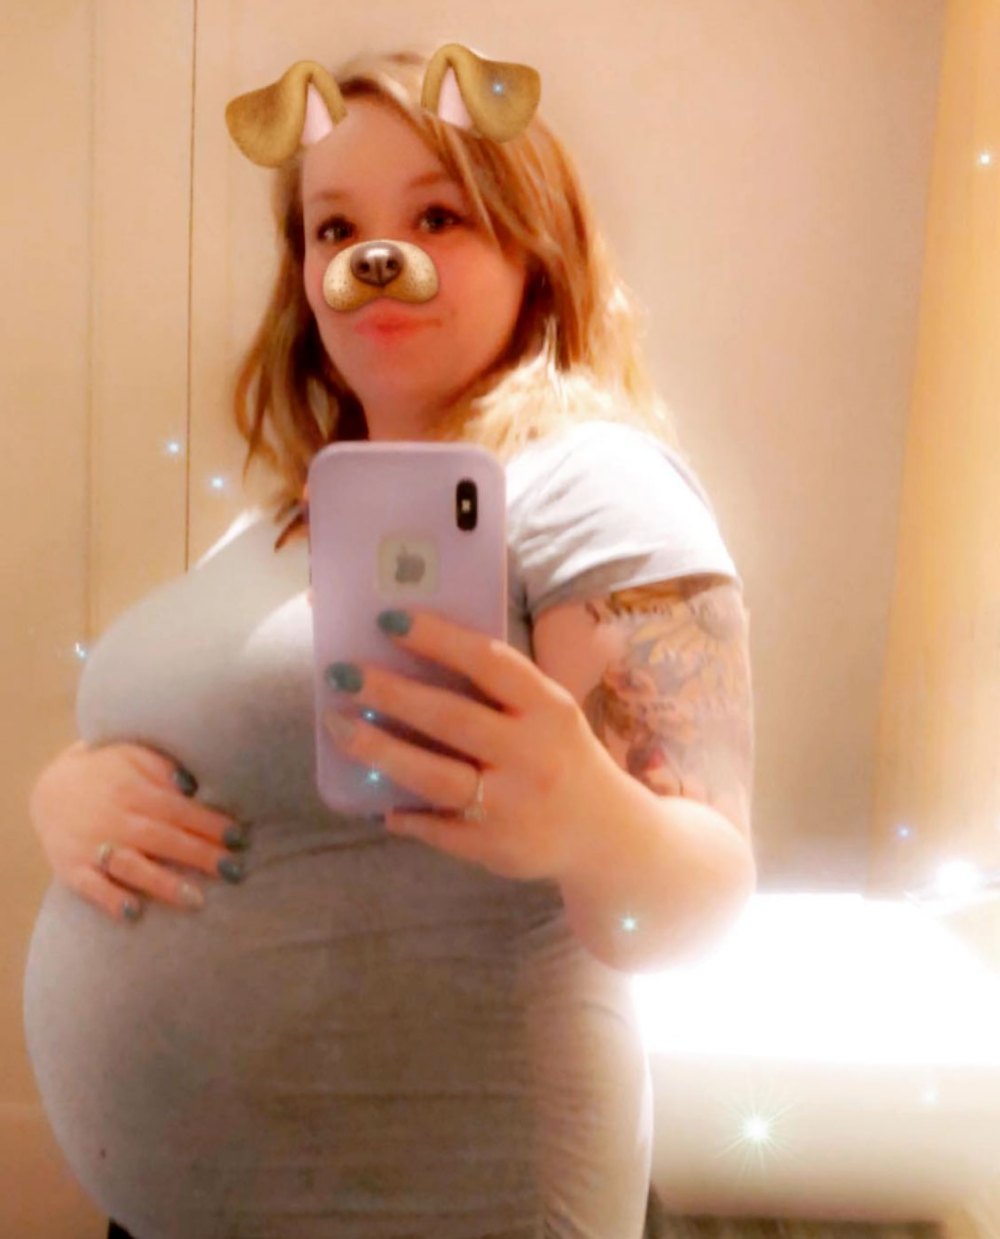 'Teen Mom OG' Star Catelynn Lowell Reaches the 38th Week of Her Pregnancy: 'I'm Beyond Anxious'